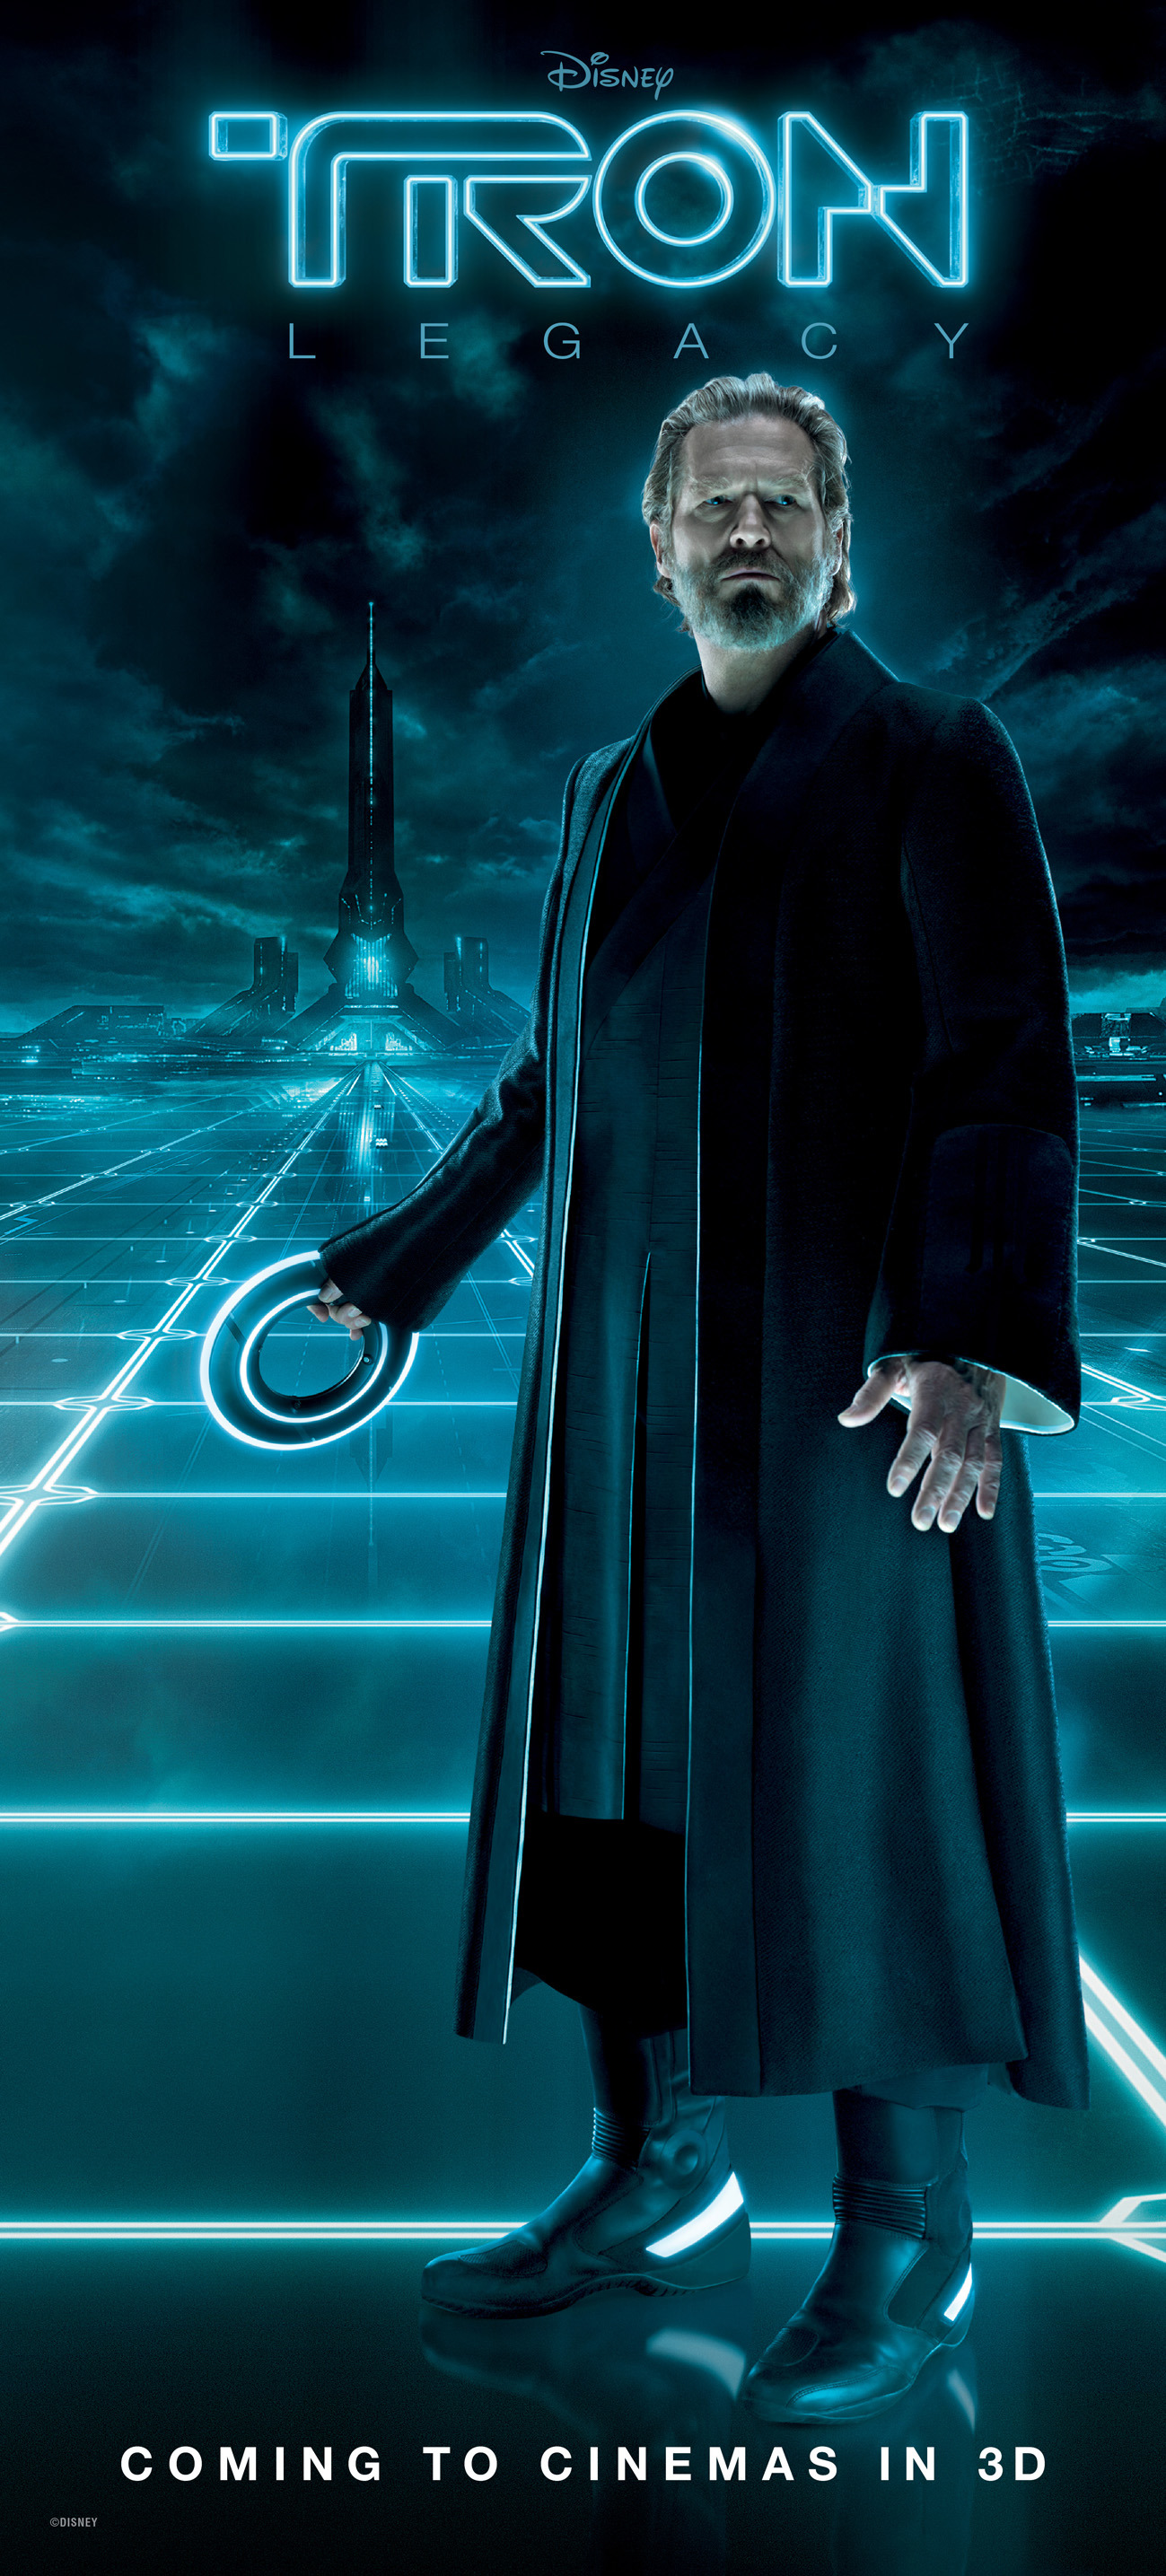 Mega Sized Movie Poster Image for Tron Legacy (#12 of 26)